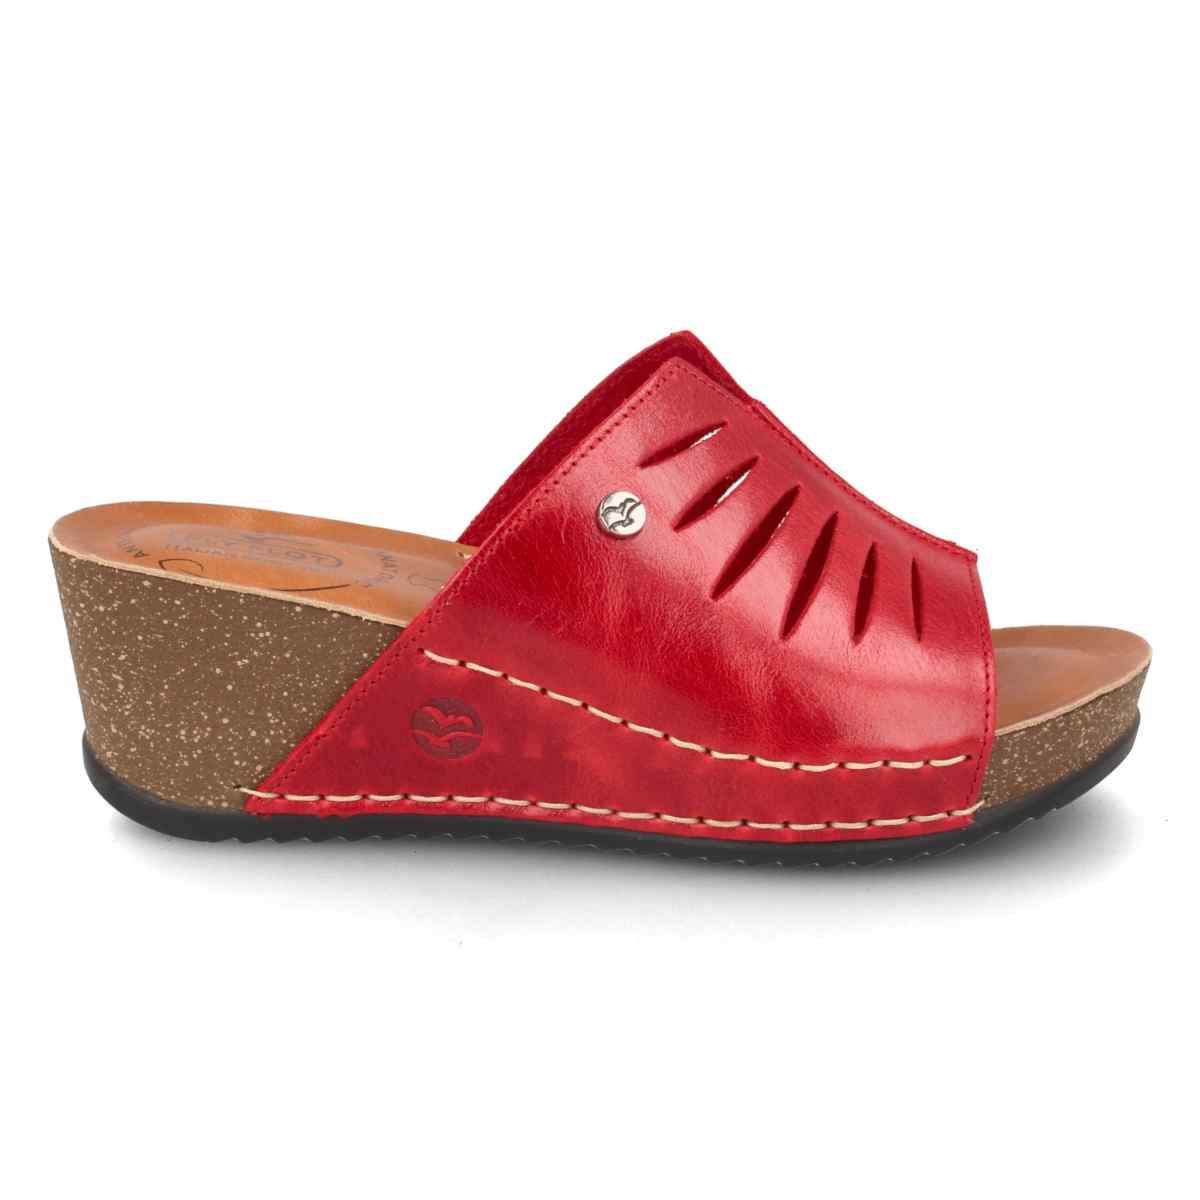 Leather Woman Slipper Red (33B10MG)